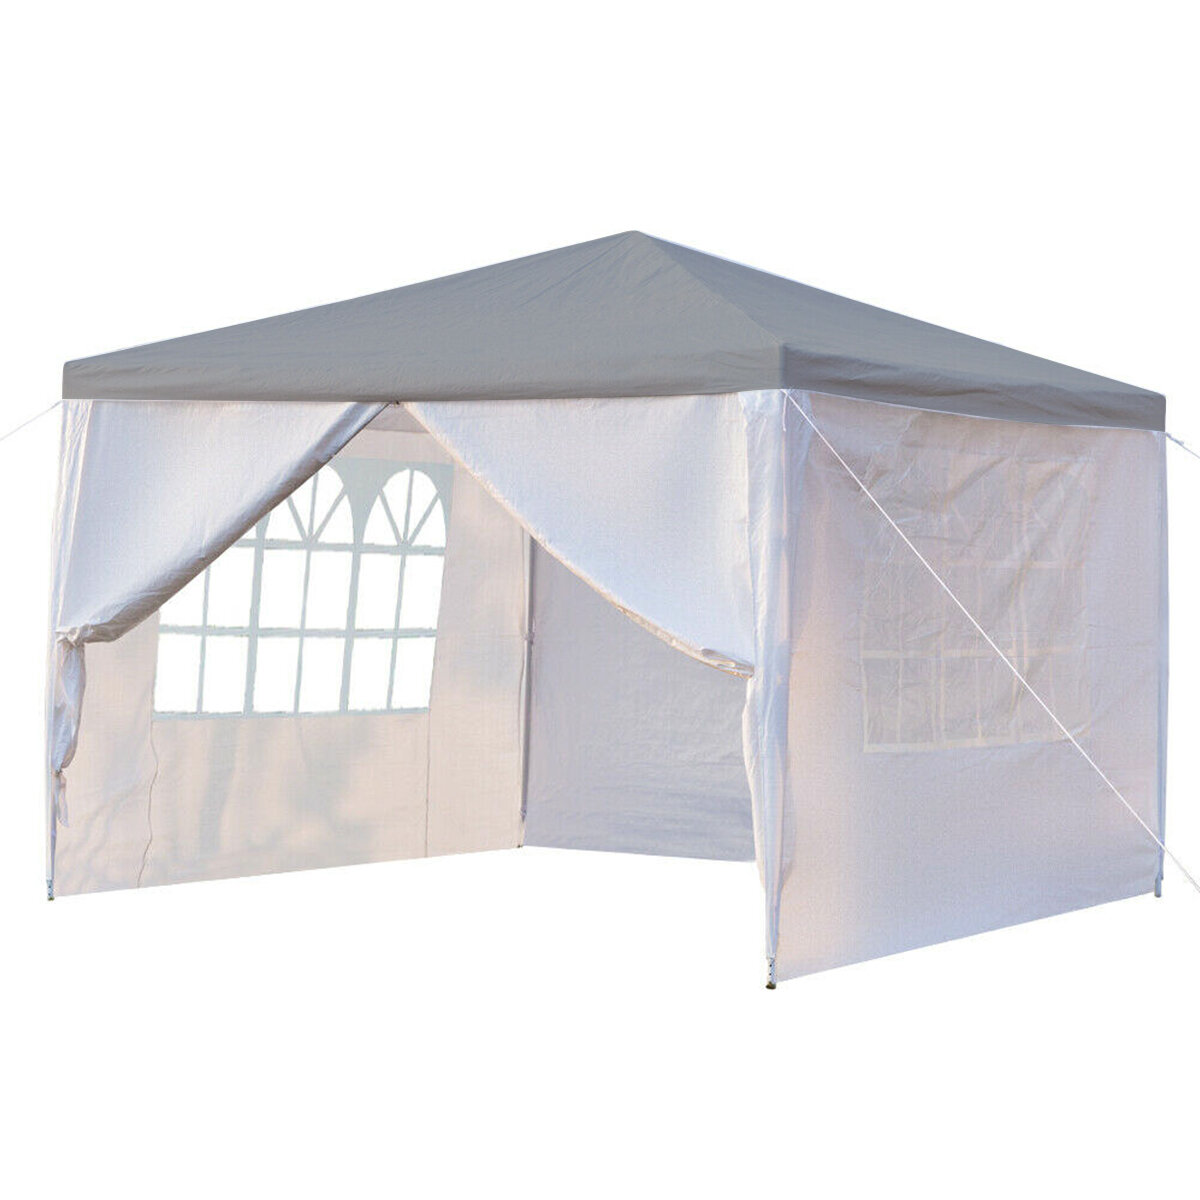 3x3m Oxford Cloth 4 Side Walls Party Tent Walls Side Waterproof Garden Patio Outdoor Sunshade Shelter Sidewall